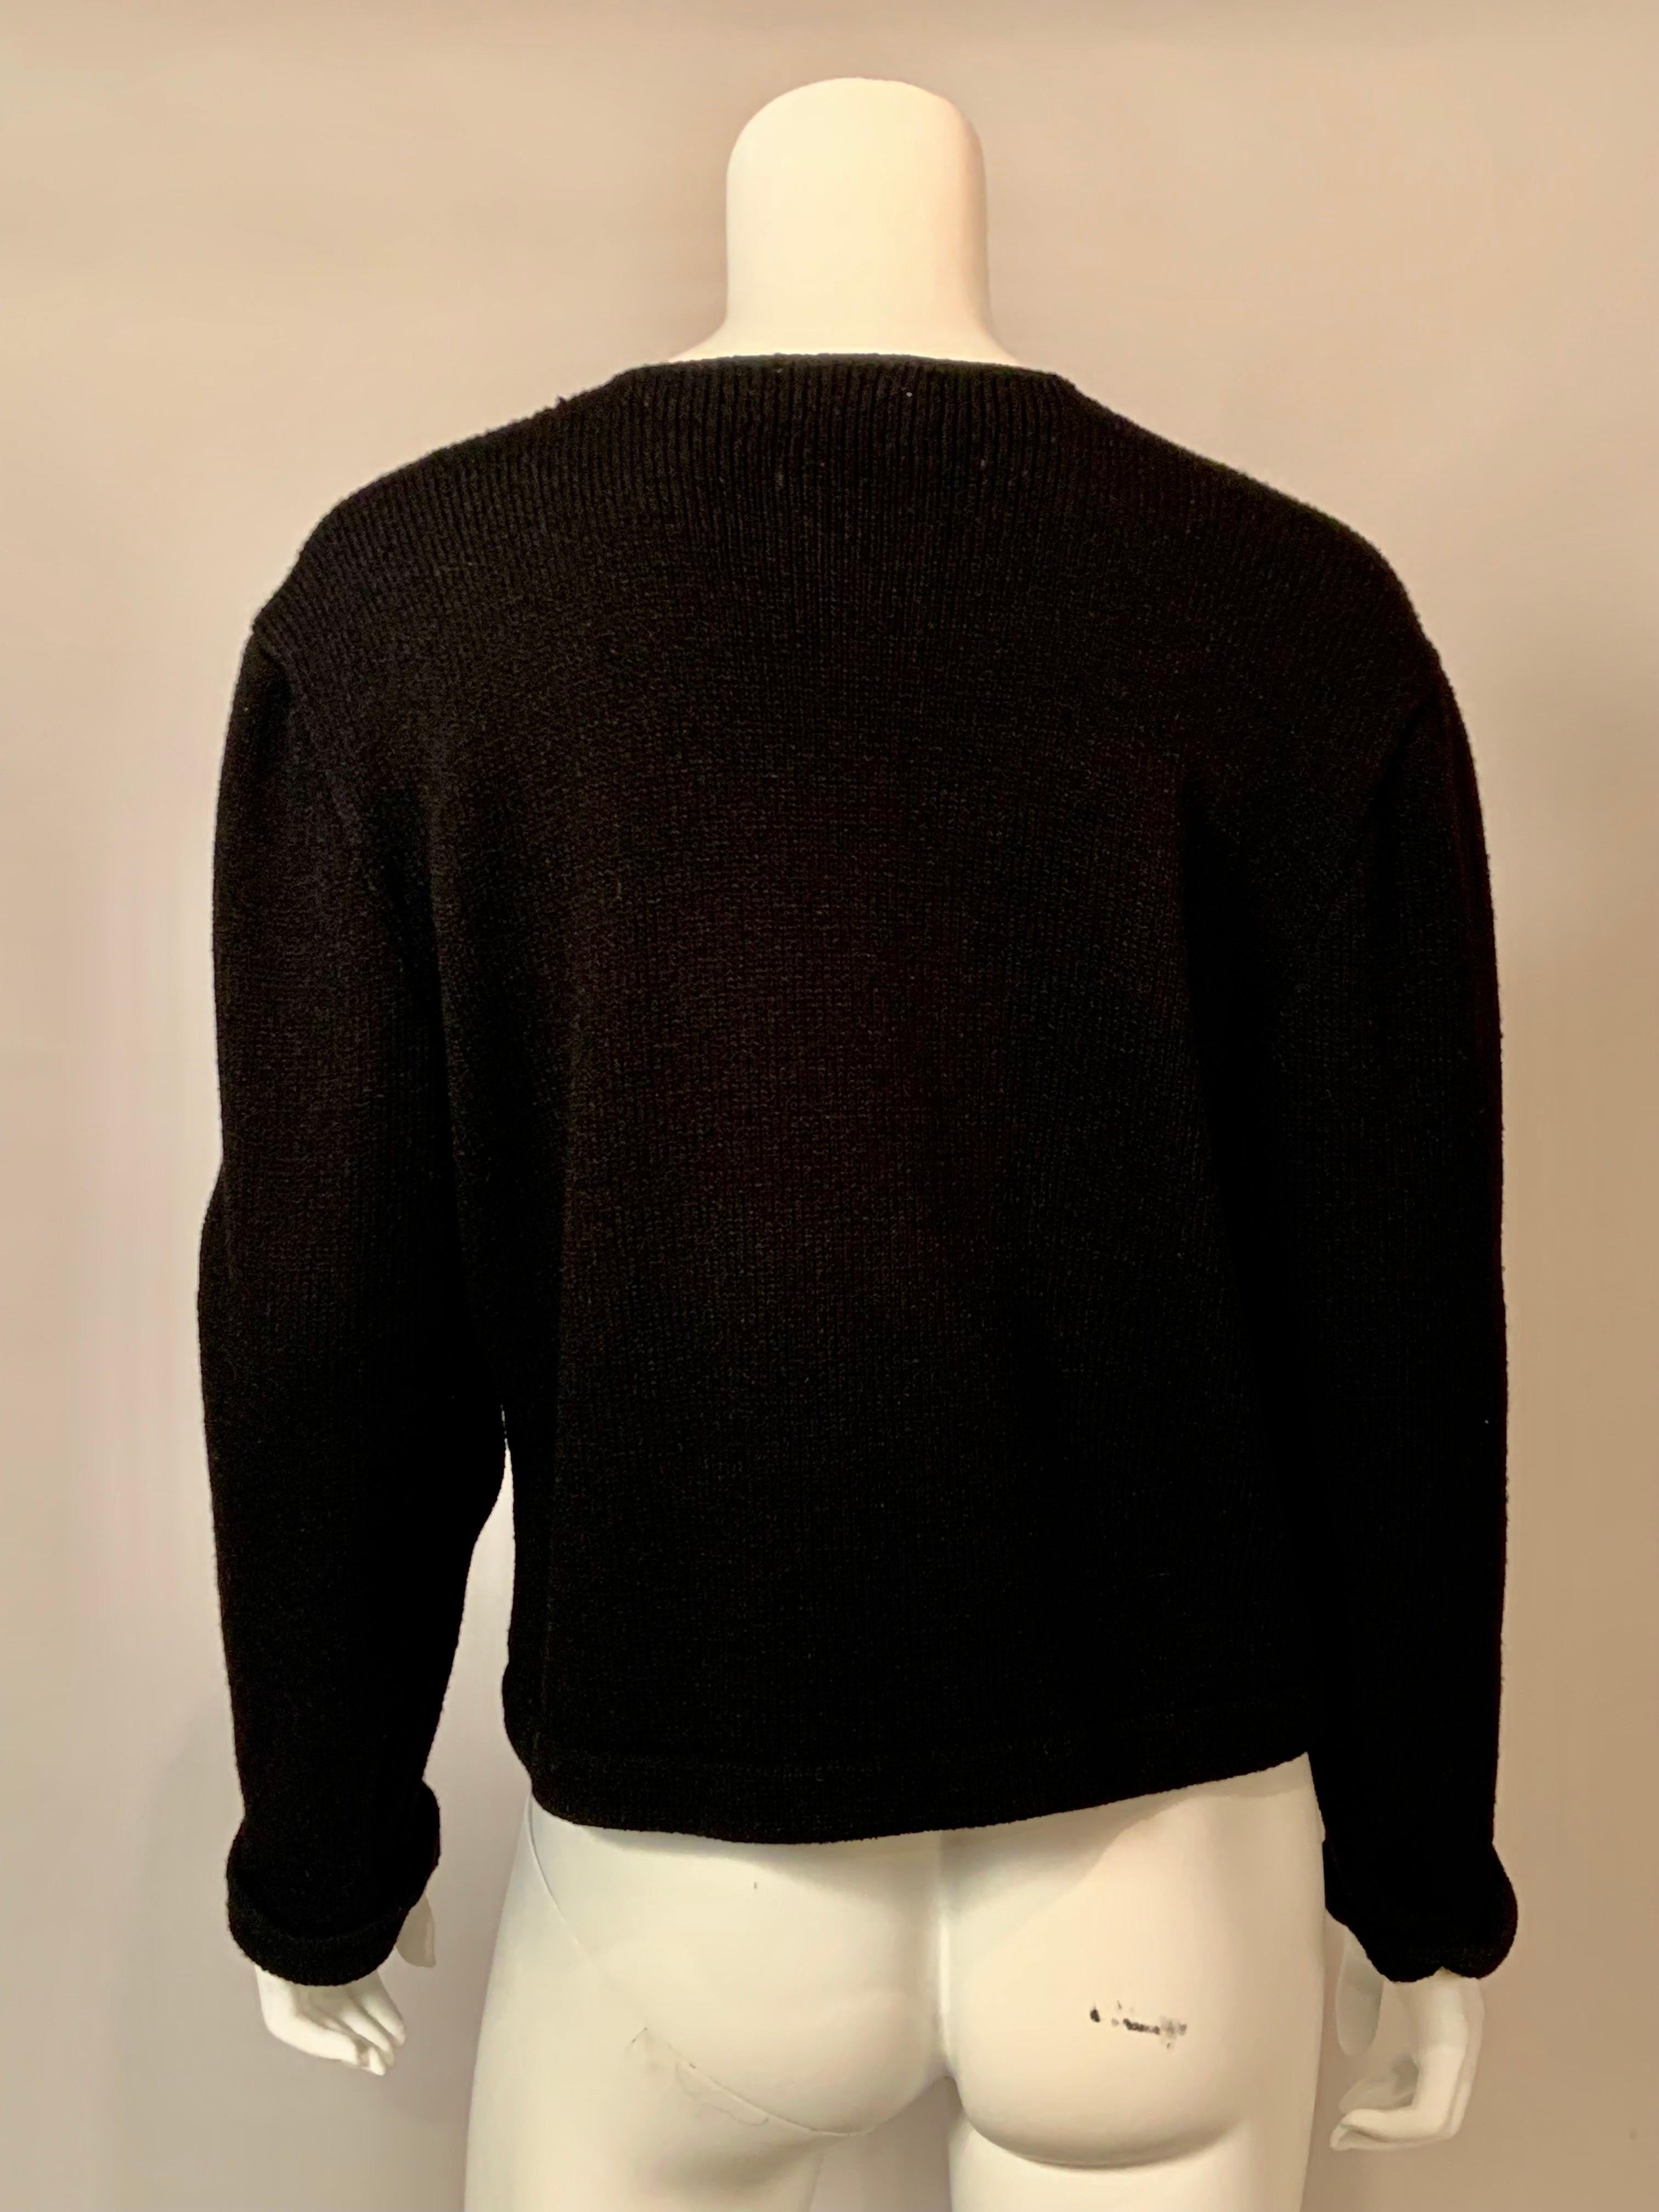 Women's 1950’s Corinne O’Hare Black Wool Sweater with Decorative Black Bows